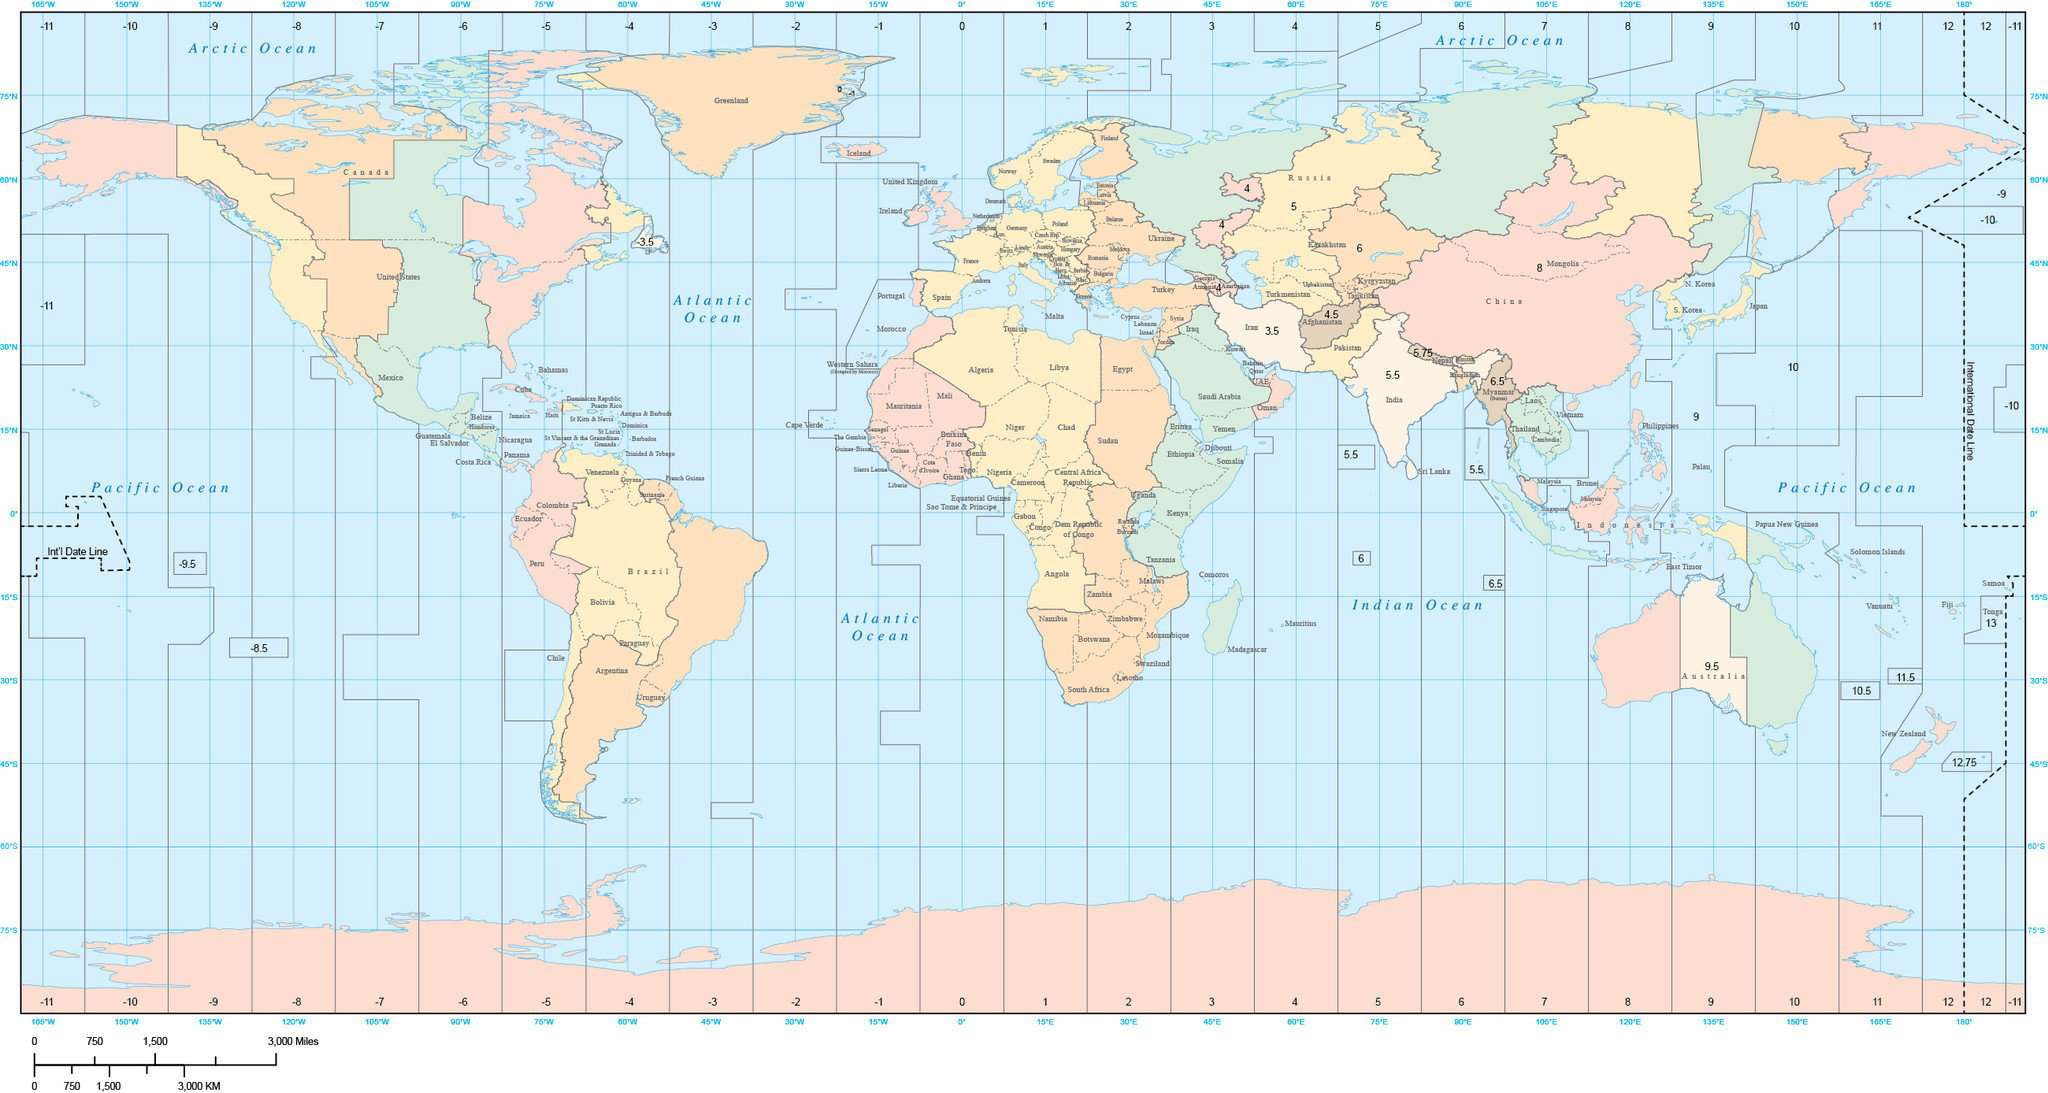 The world time zone map